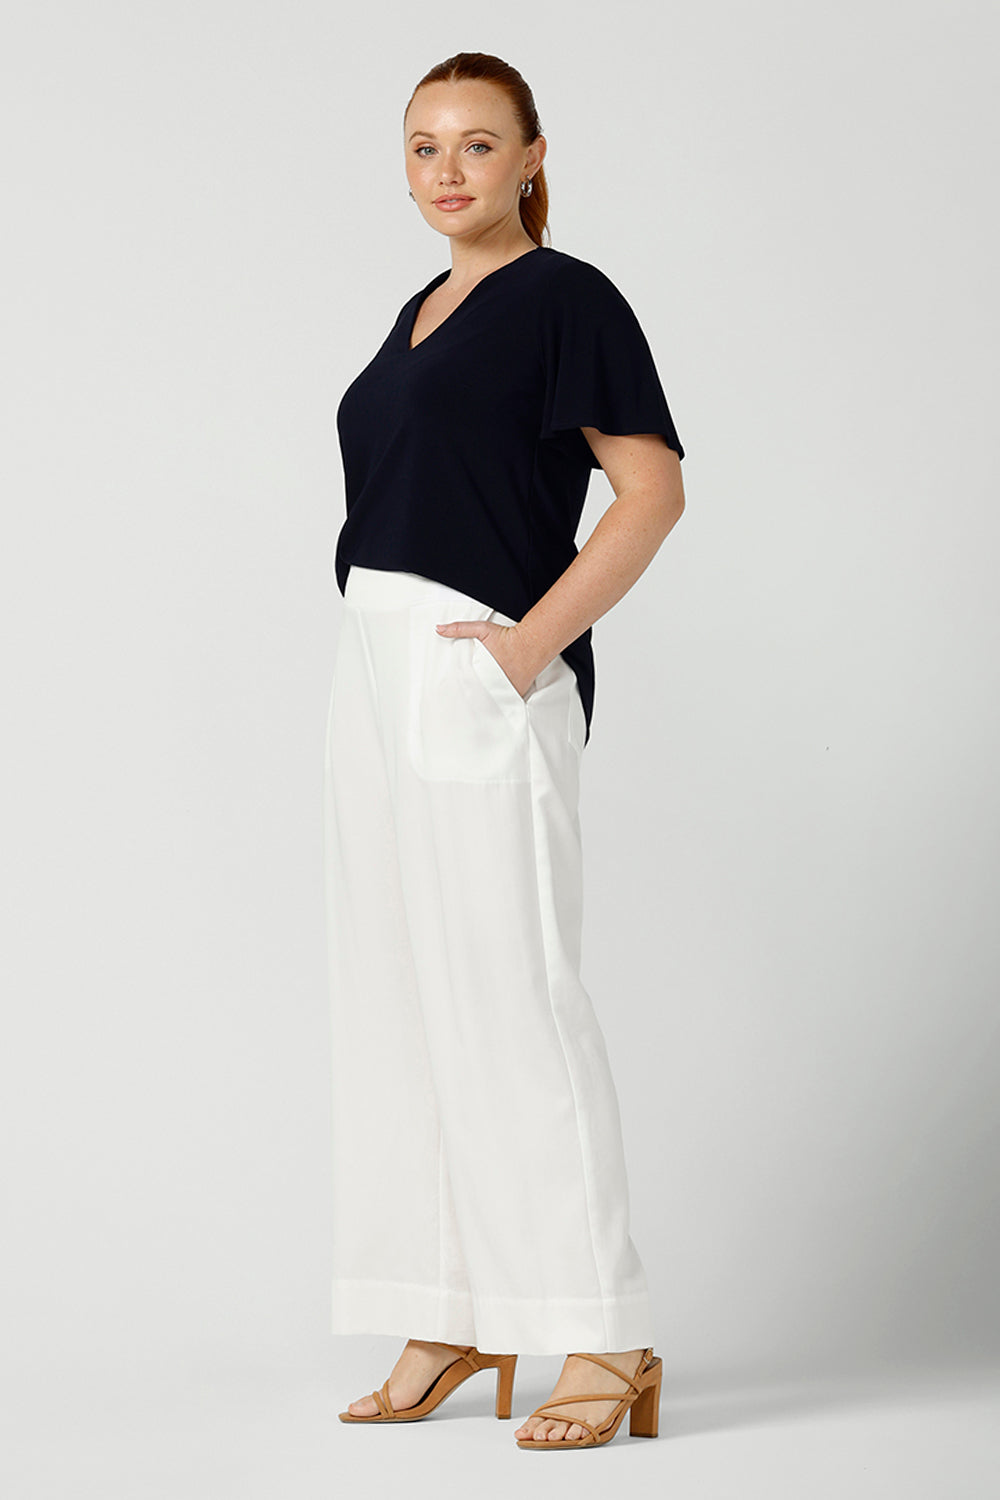 Worn by a size 12, curvy woman, this is a semi-fitted, V-neck top with flutter sleeves in navy blue jersey. Made in Australia by women's clothing brand, Leina & Fleur , this classic navy top is worn with wide leg white pants for summer.  Great for capsule wardrobes, smart casual wear and as a work blouse, shop this top and other women's clothing online in sizes 8 to 24 at L&F's online fashion boutique!